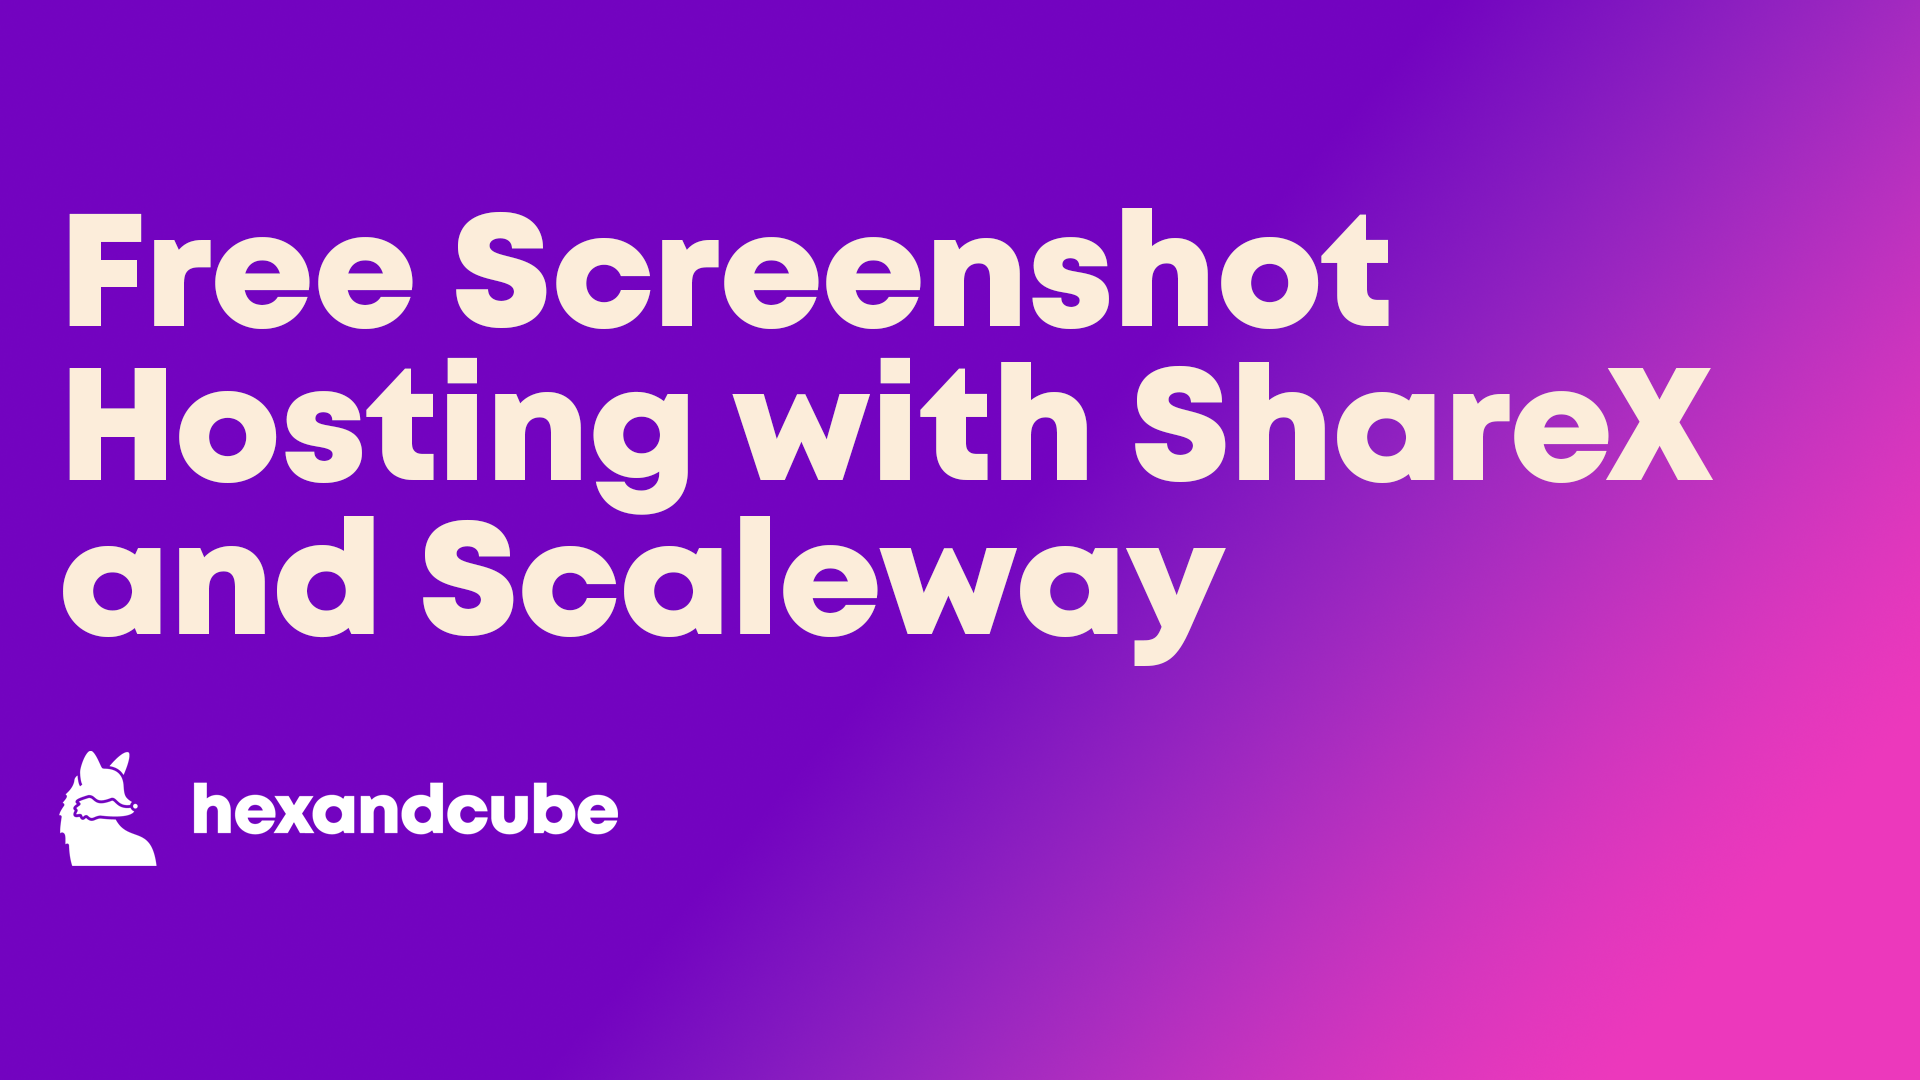 Free screenshot hosting with ShareX and Scaleway